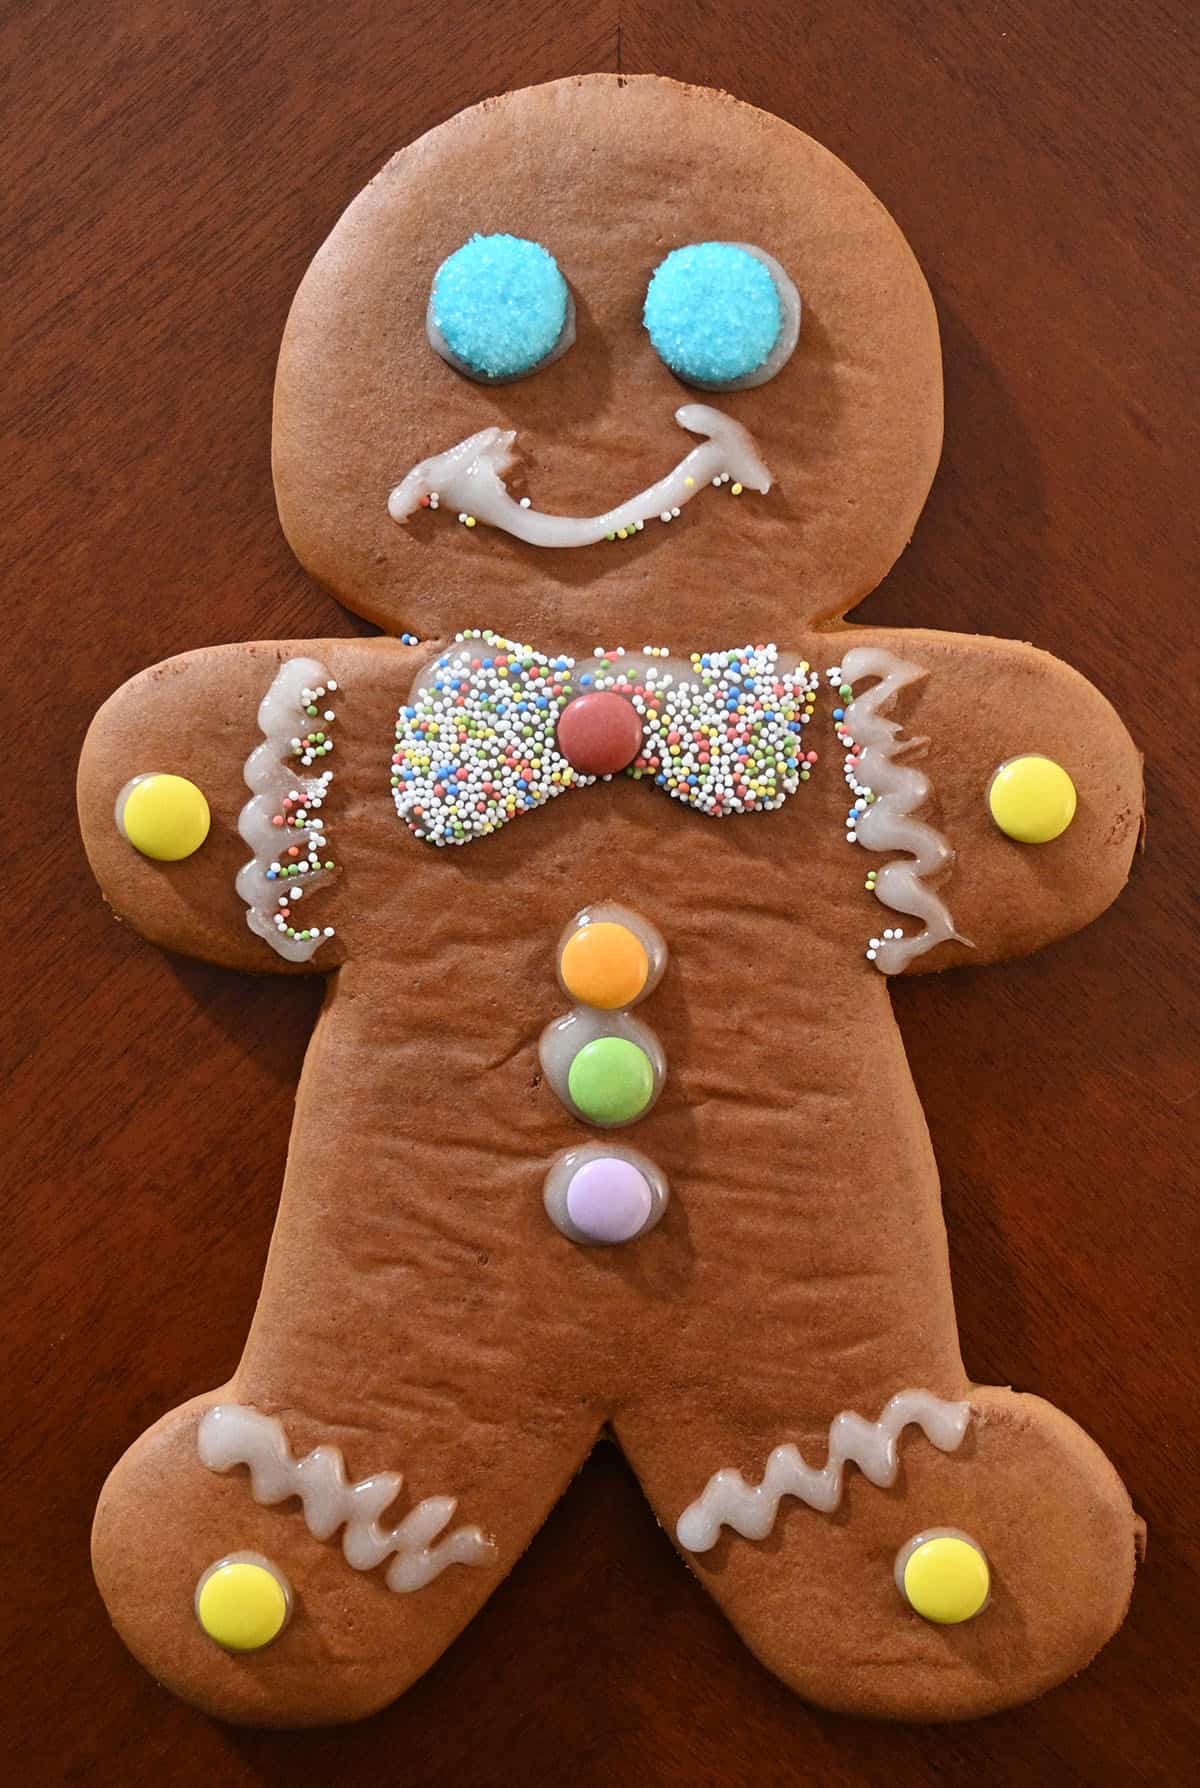 Closeup image of one ginger person decorated and laying on a table.